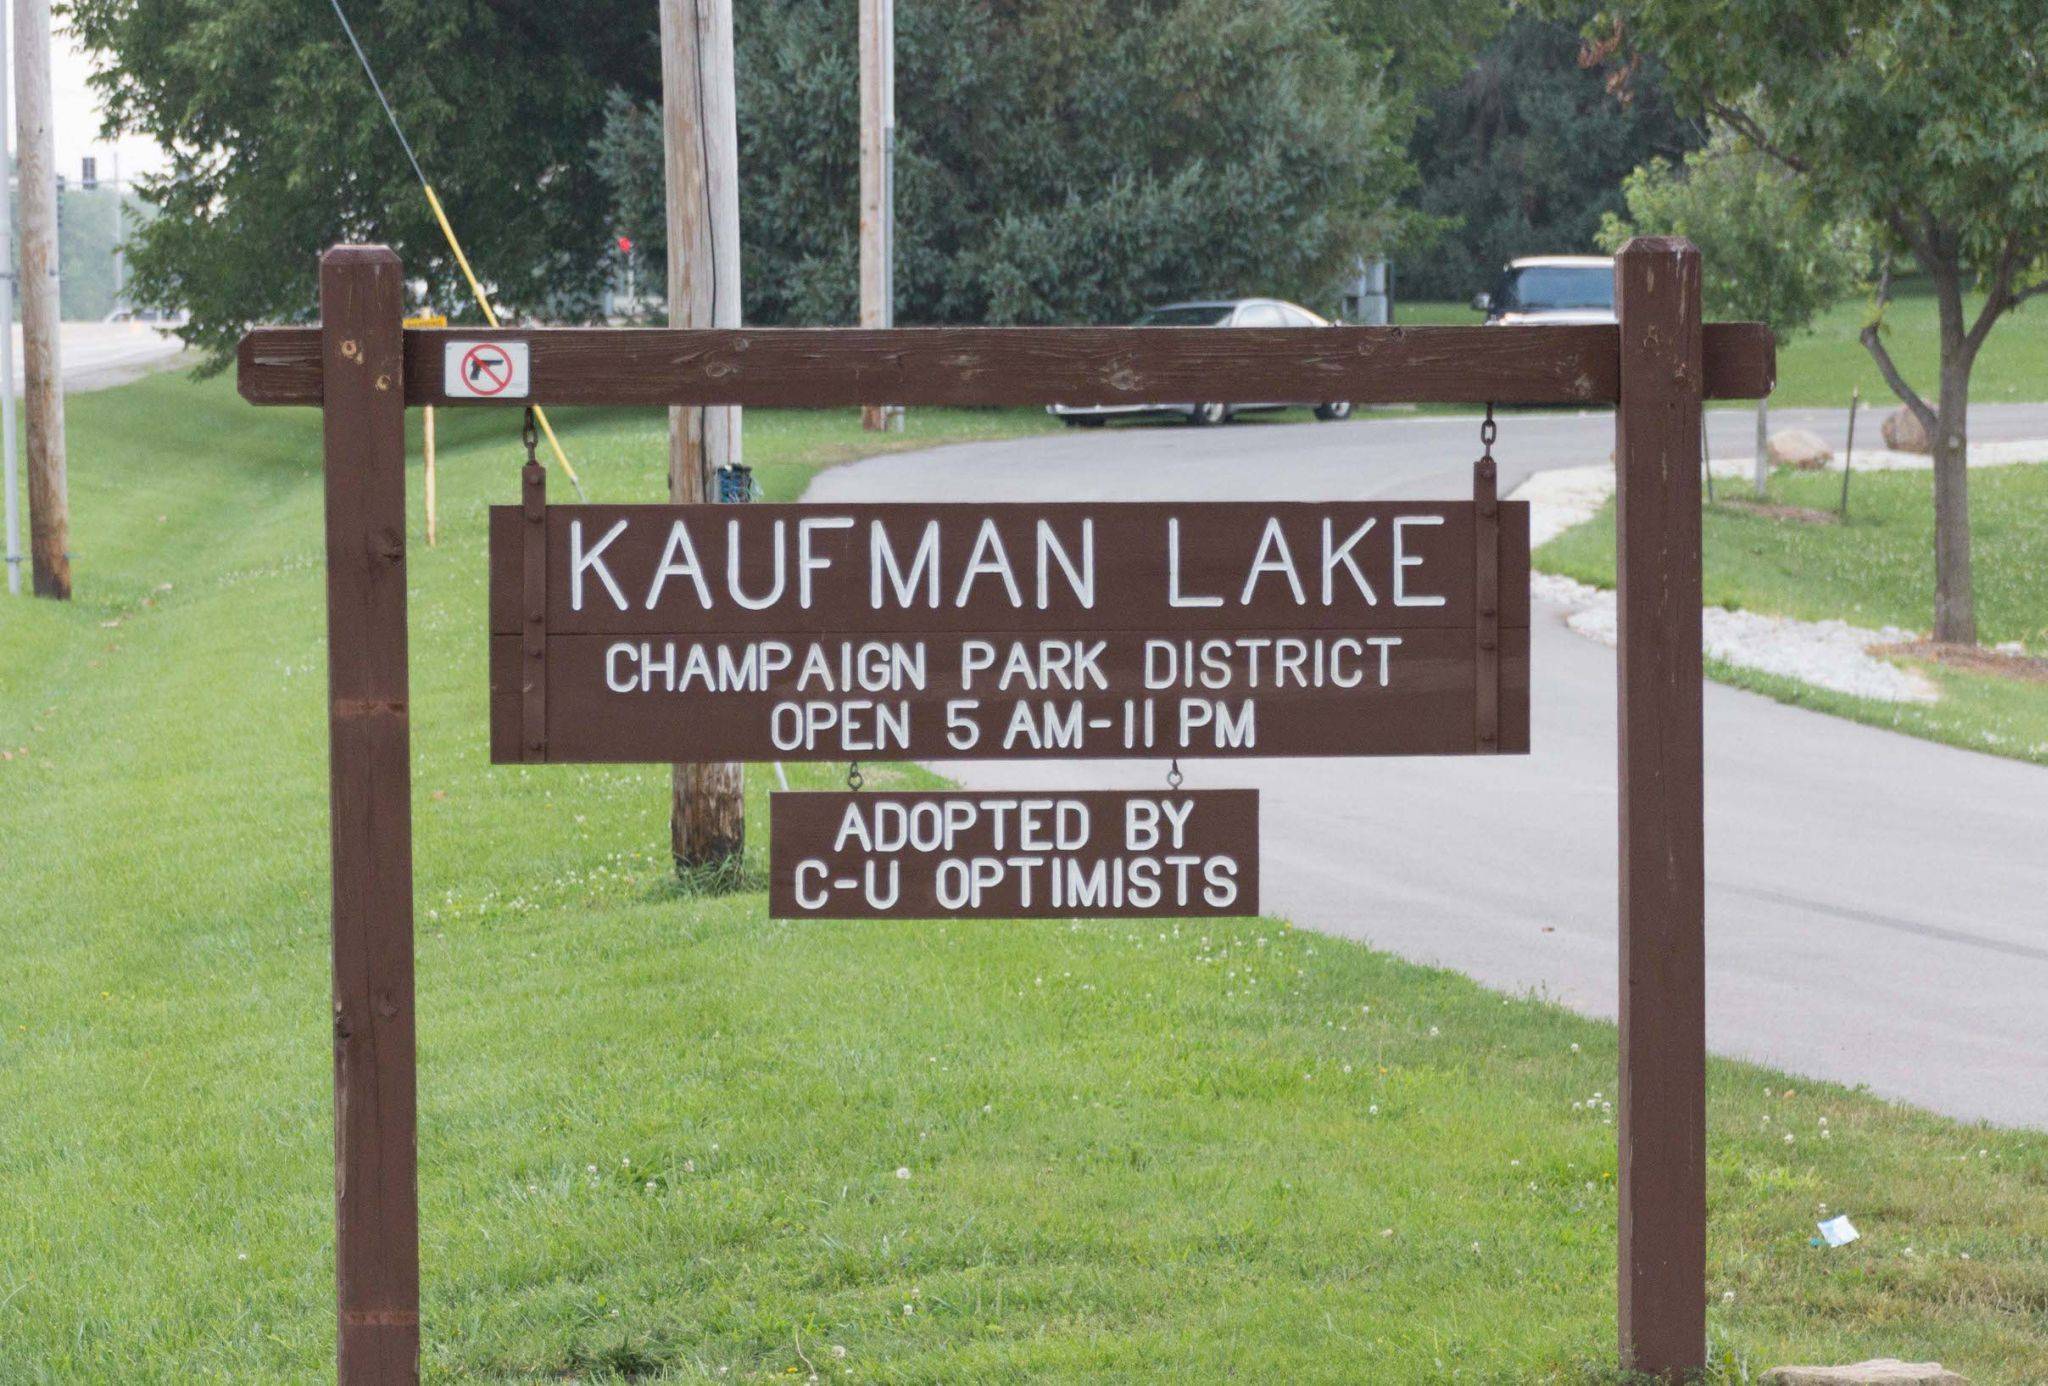 Kaufman Lake is your next park to visit